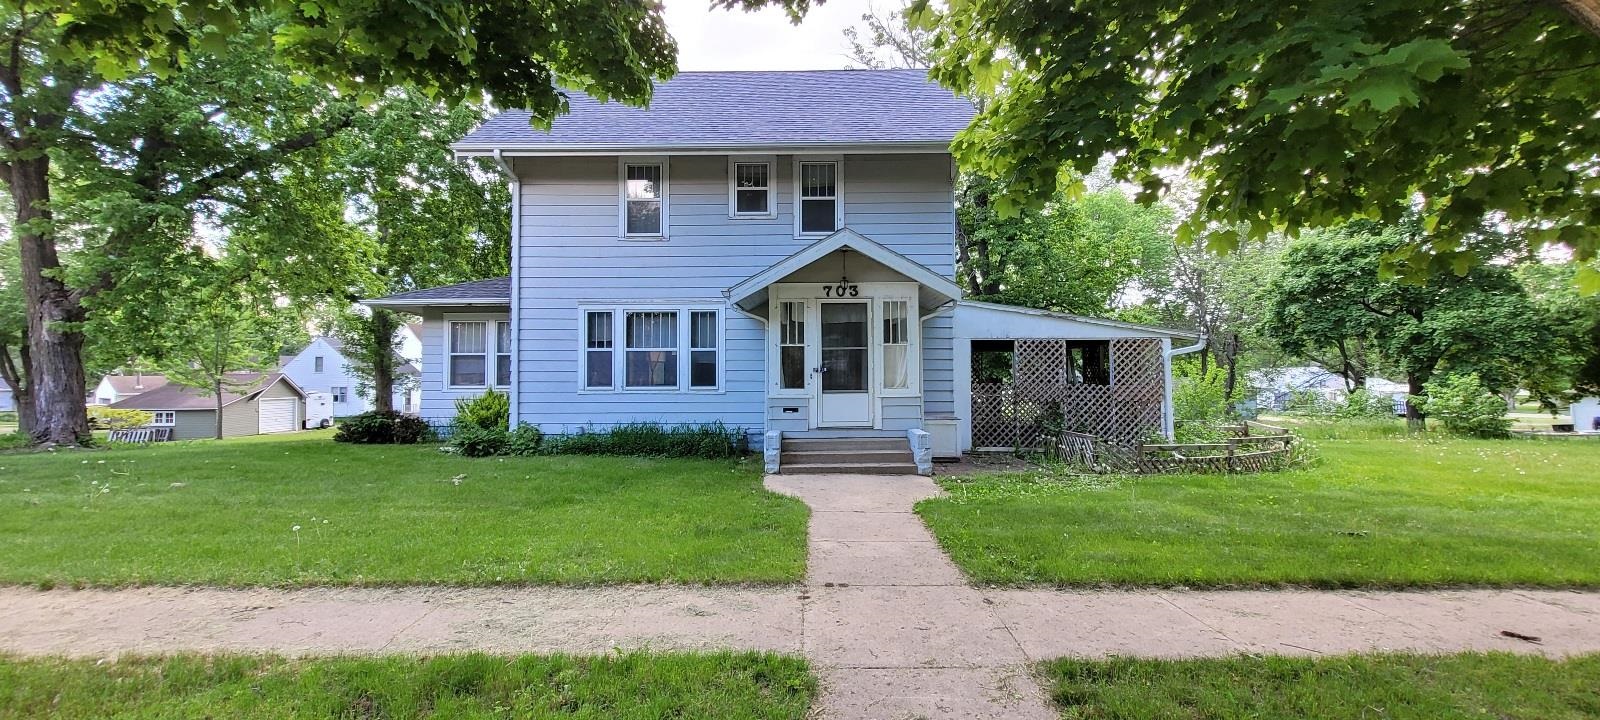 703 6th St, Estherville, IA 51334 